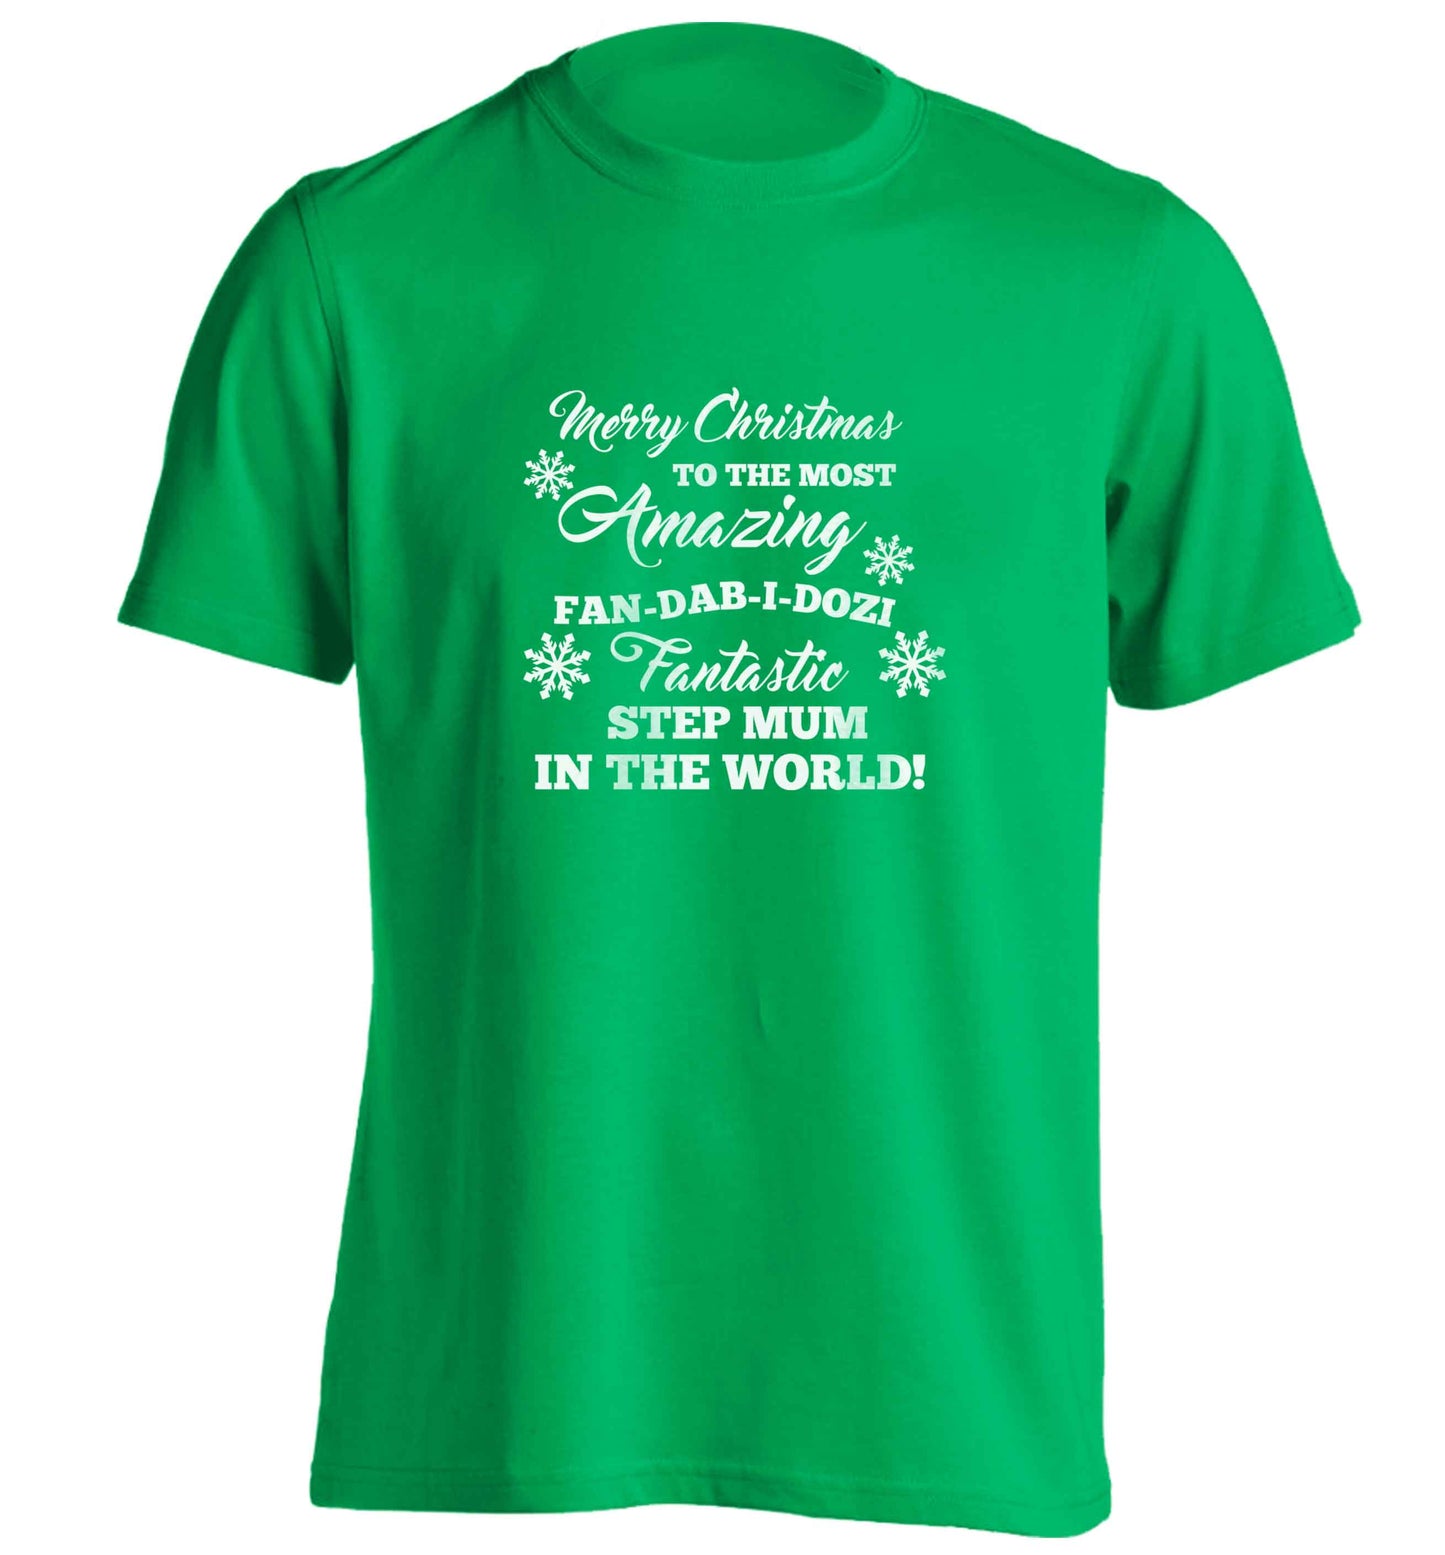 Merry Christmas to the most amazing fan-dab-i-dozi fantasic Step Mum in the world adults unisex green Tshirt 2XL